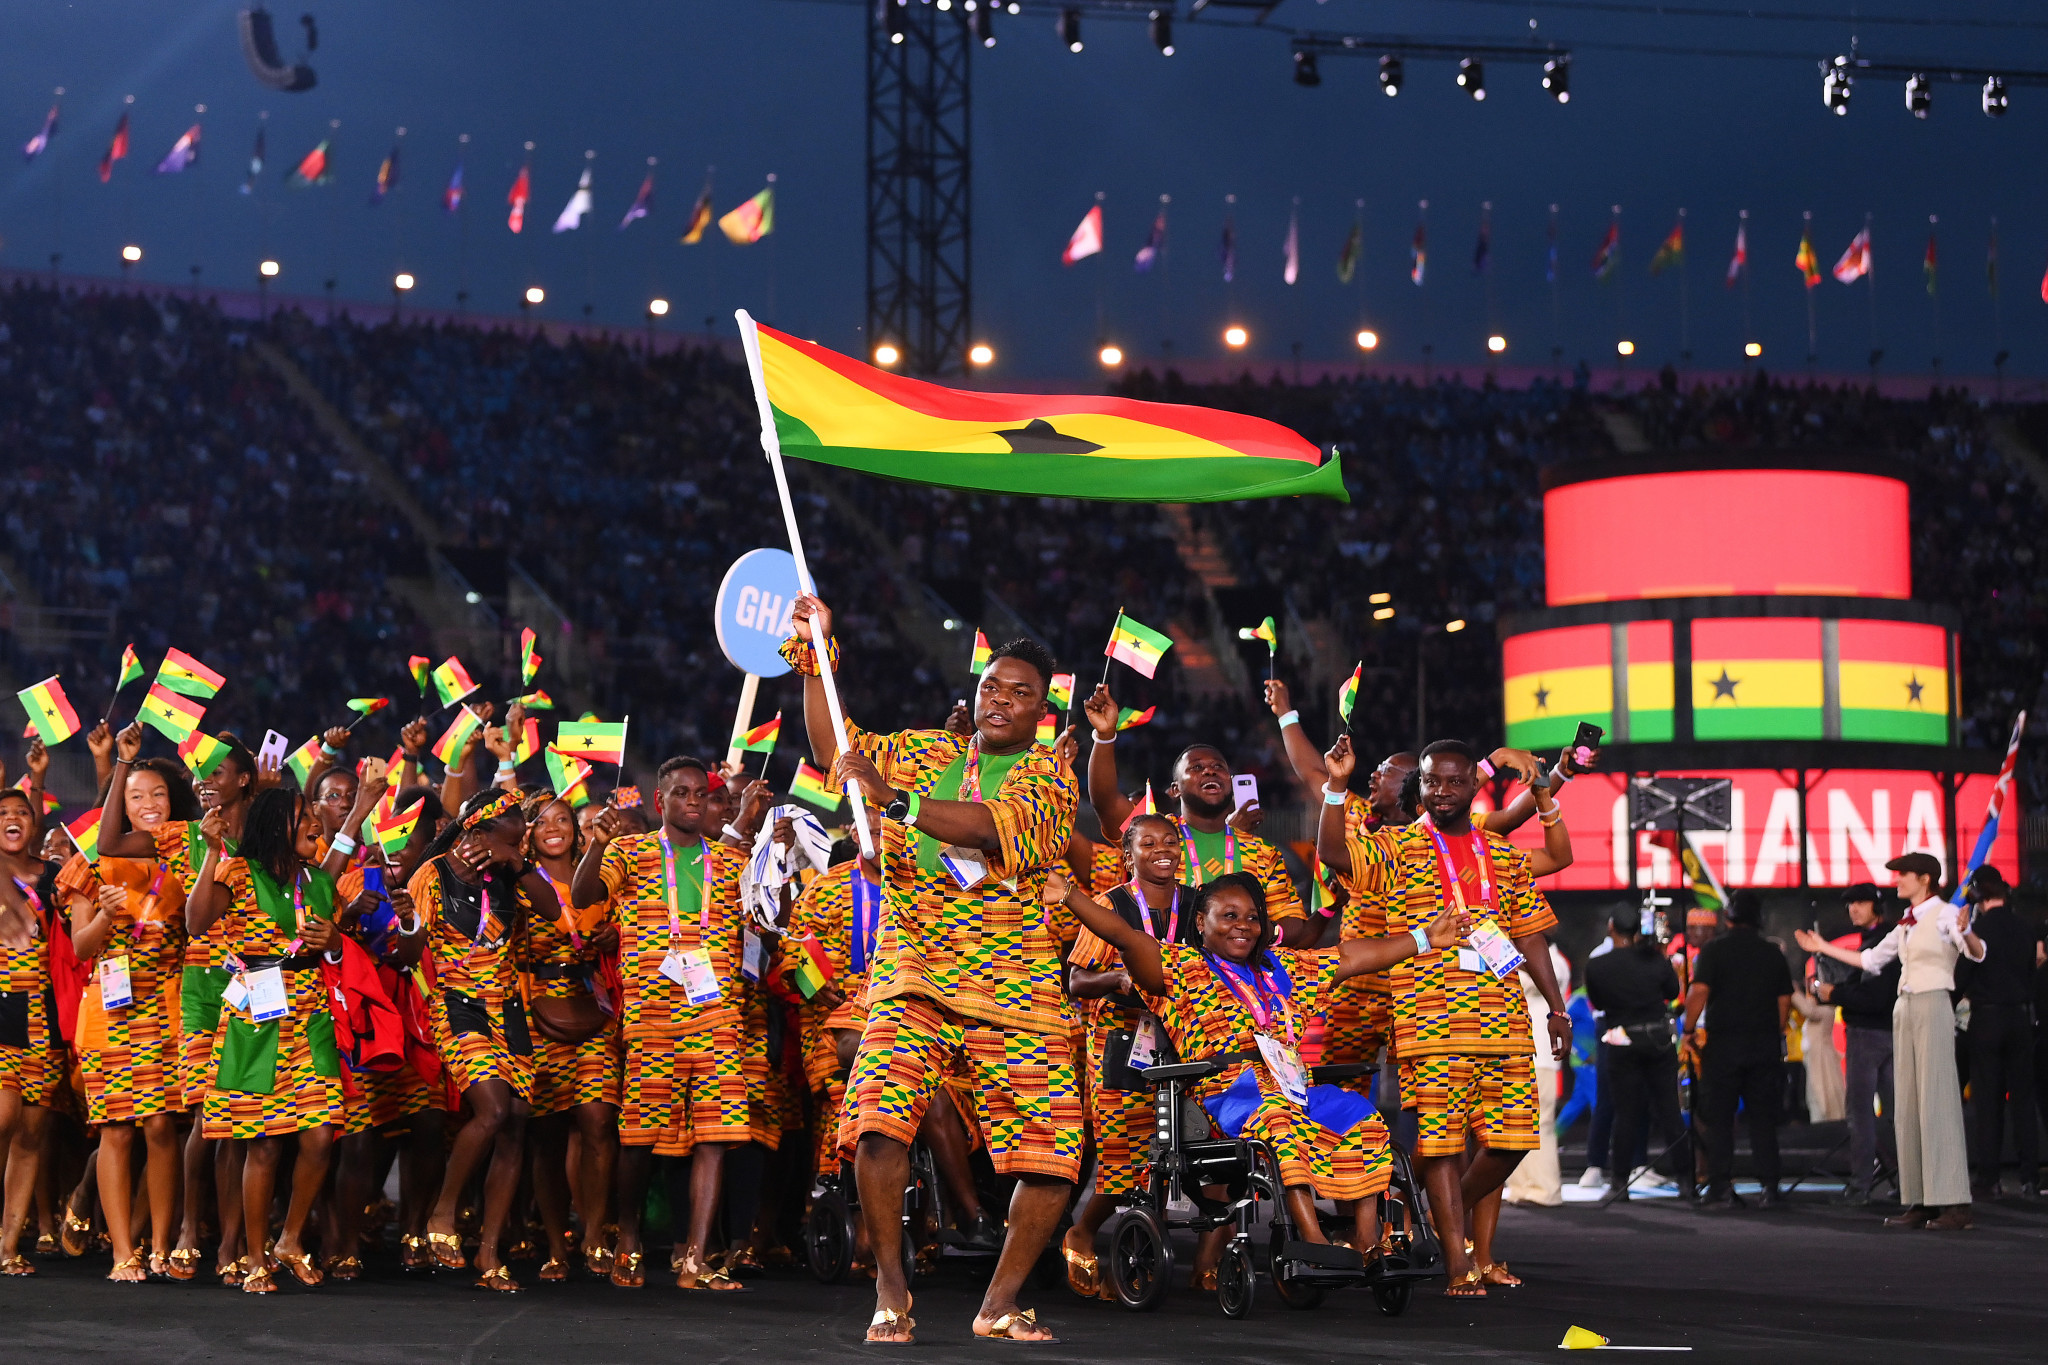 Accra 2023 insists Government "100 per cent committed" to African Games despite economic woes